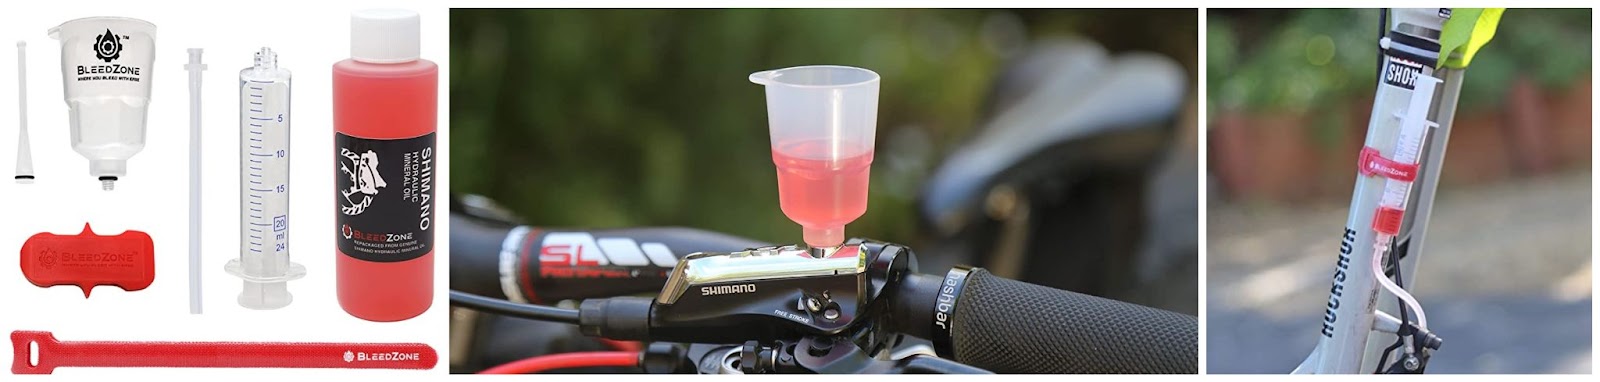 Mountain bike brakes need to be bled with a brake bleed kit so that they can be functional again.